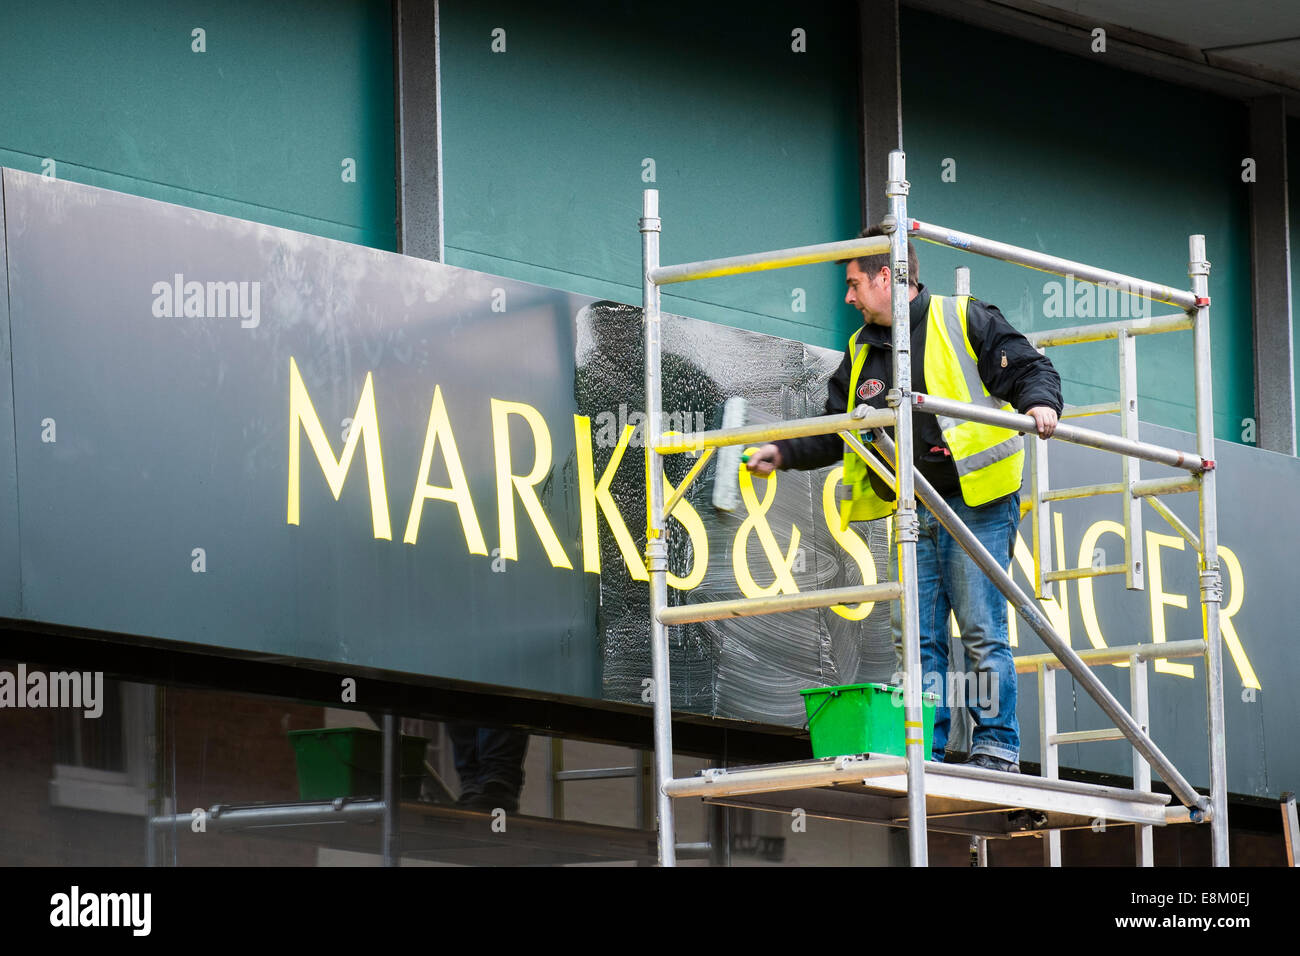 Nettoyage travailleur Marks and Spencer shop sign in Shrewsbury Shropshire England UK Banque D'Images